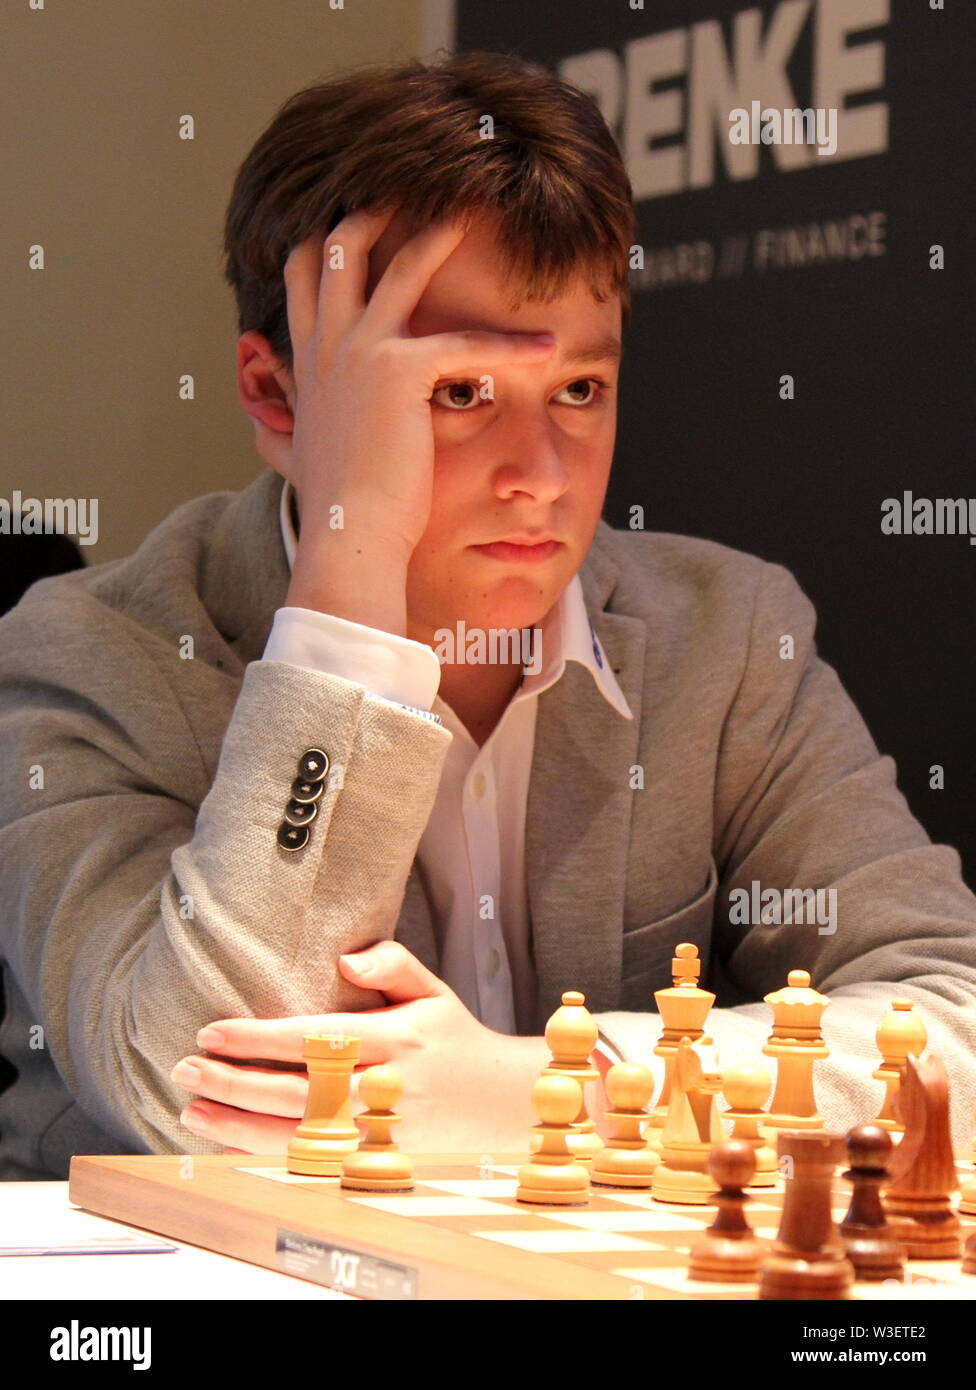 FIDE - International Chess Federation - August 2019 FIDE rating